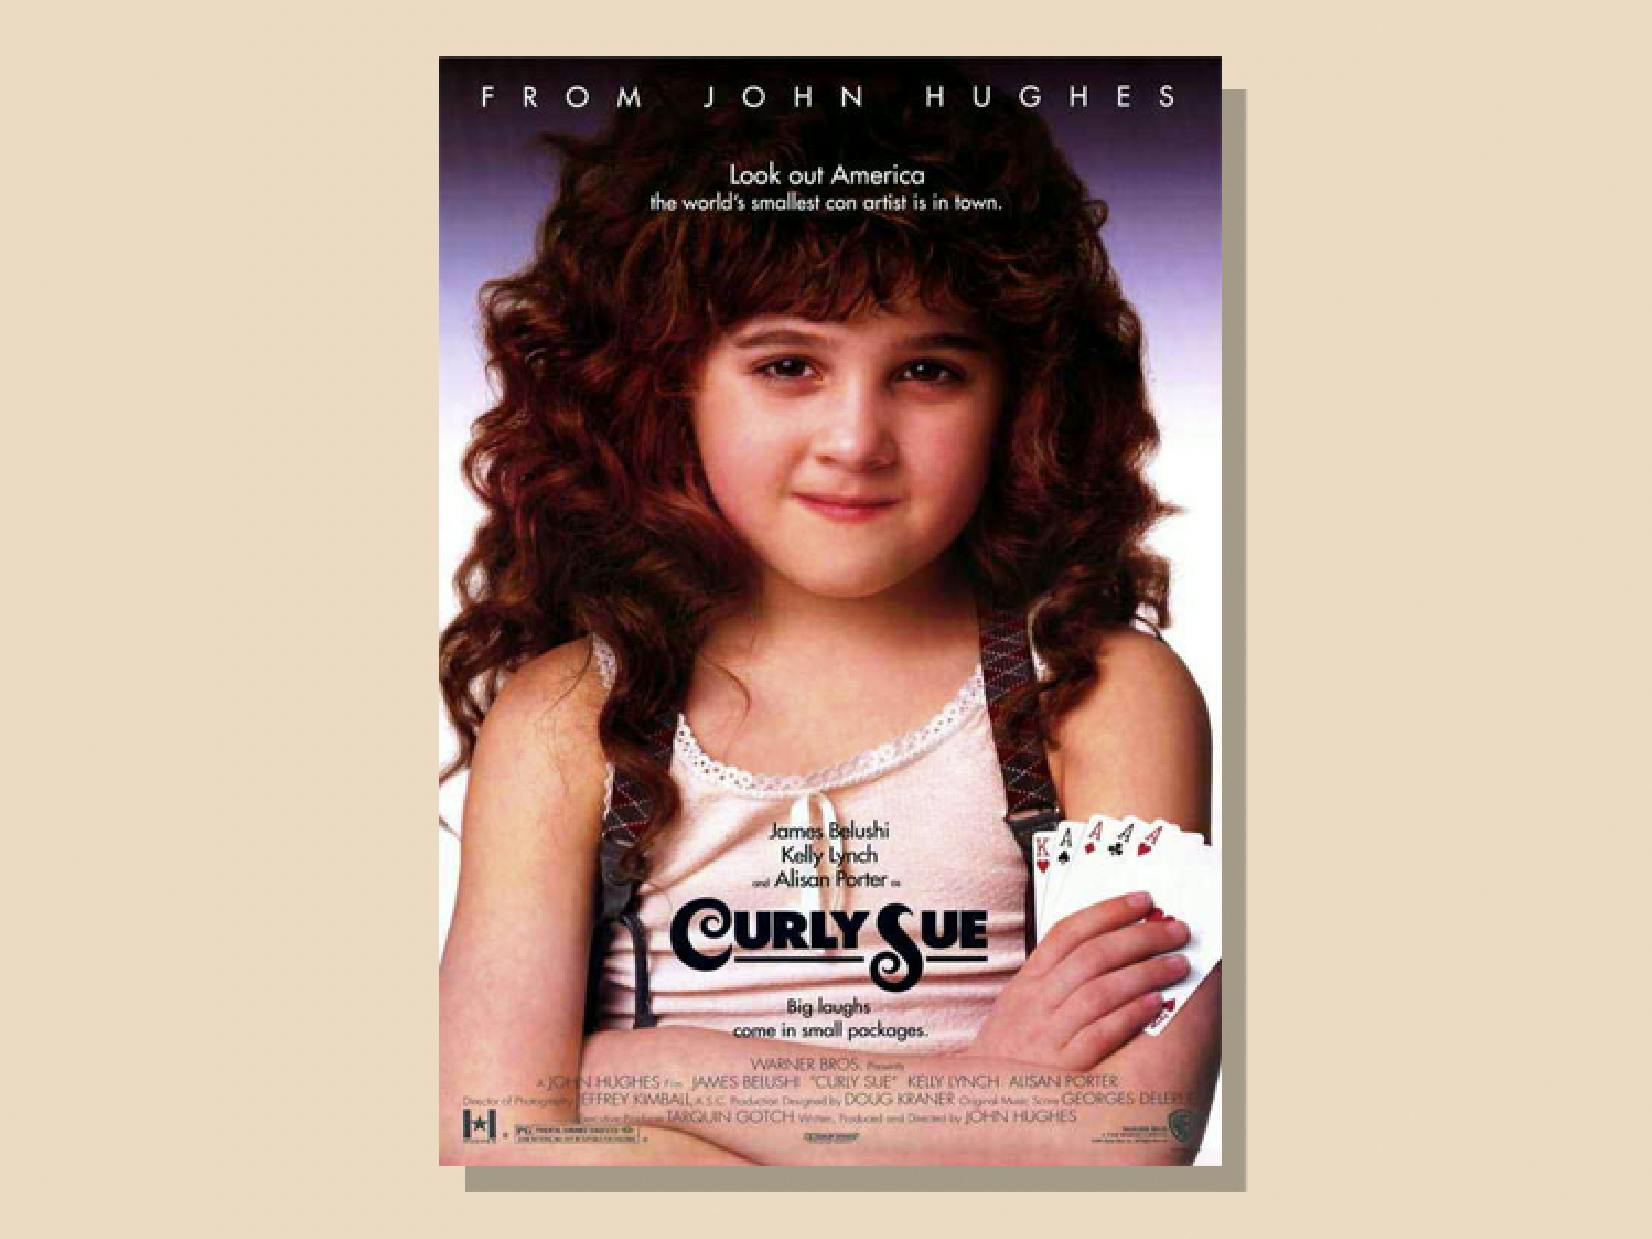 Curly Sue, one of the best kids thanksgiving movies